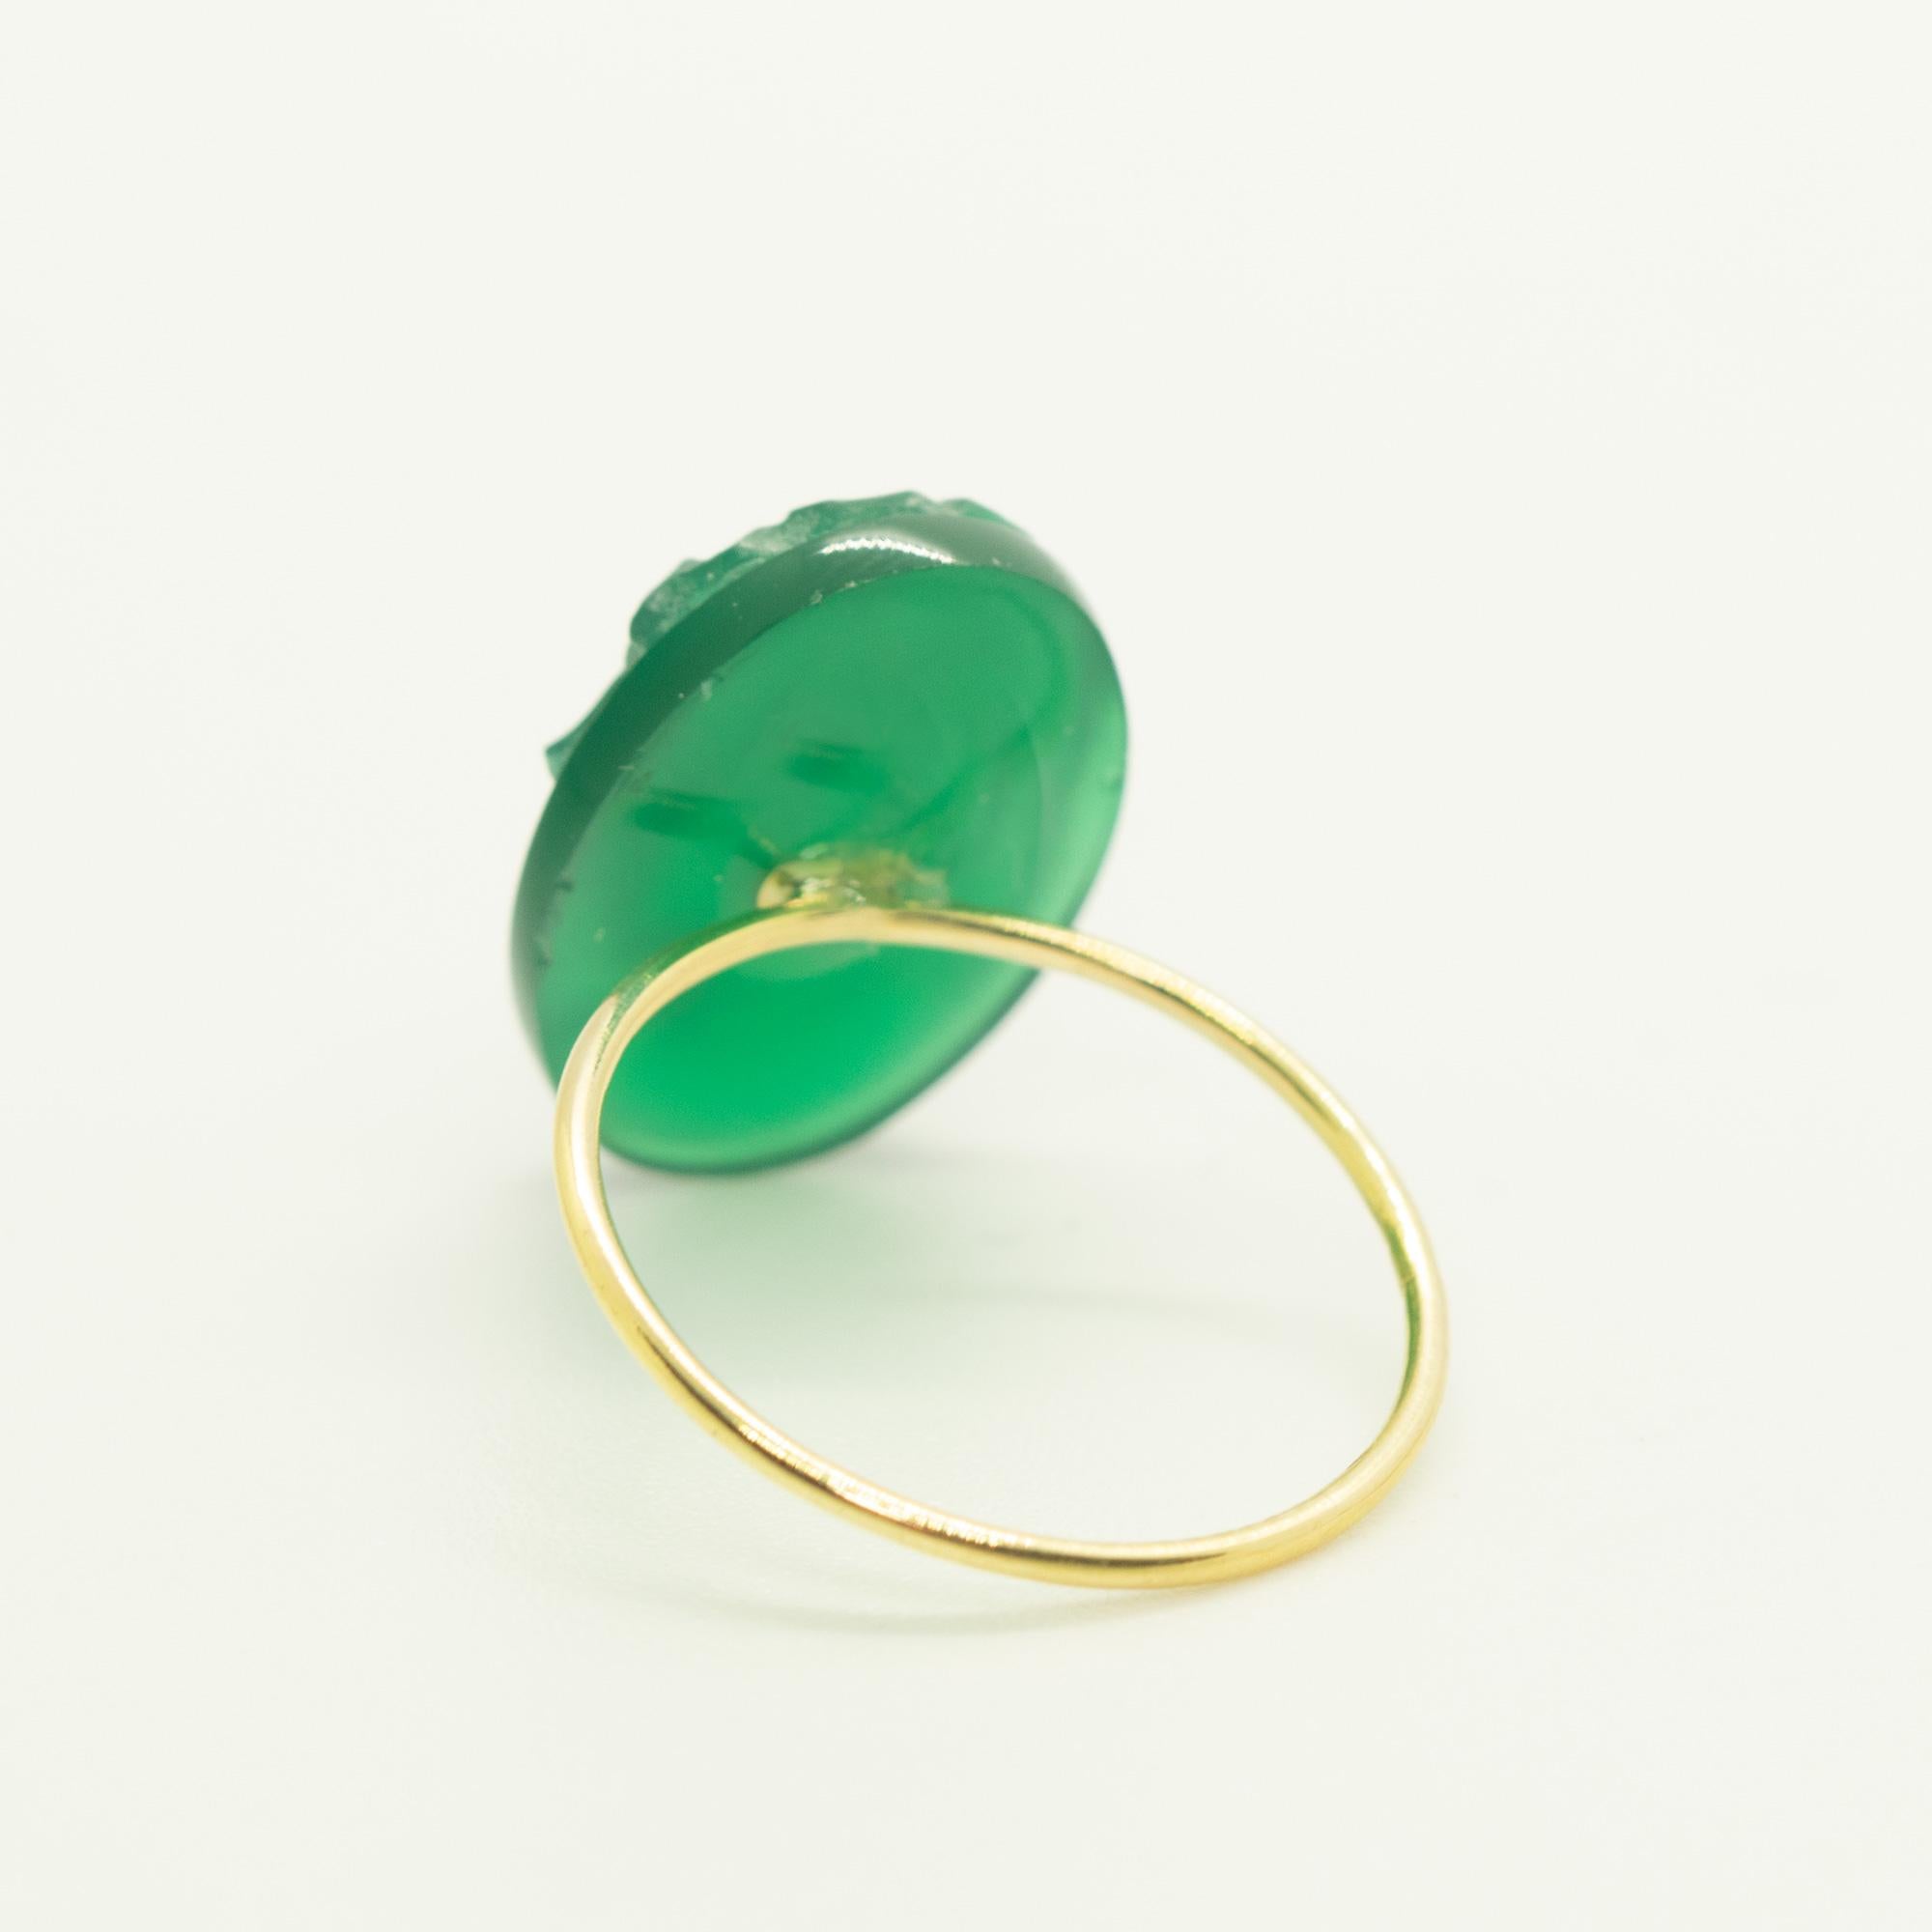 Oval Cut Intini Jewels Green Agate Cammeo 18 Karat Gold Oval Handmade Chic Cocktail Ring For Sale